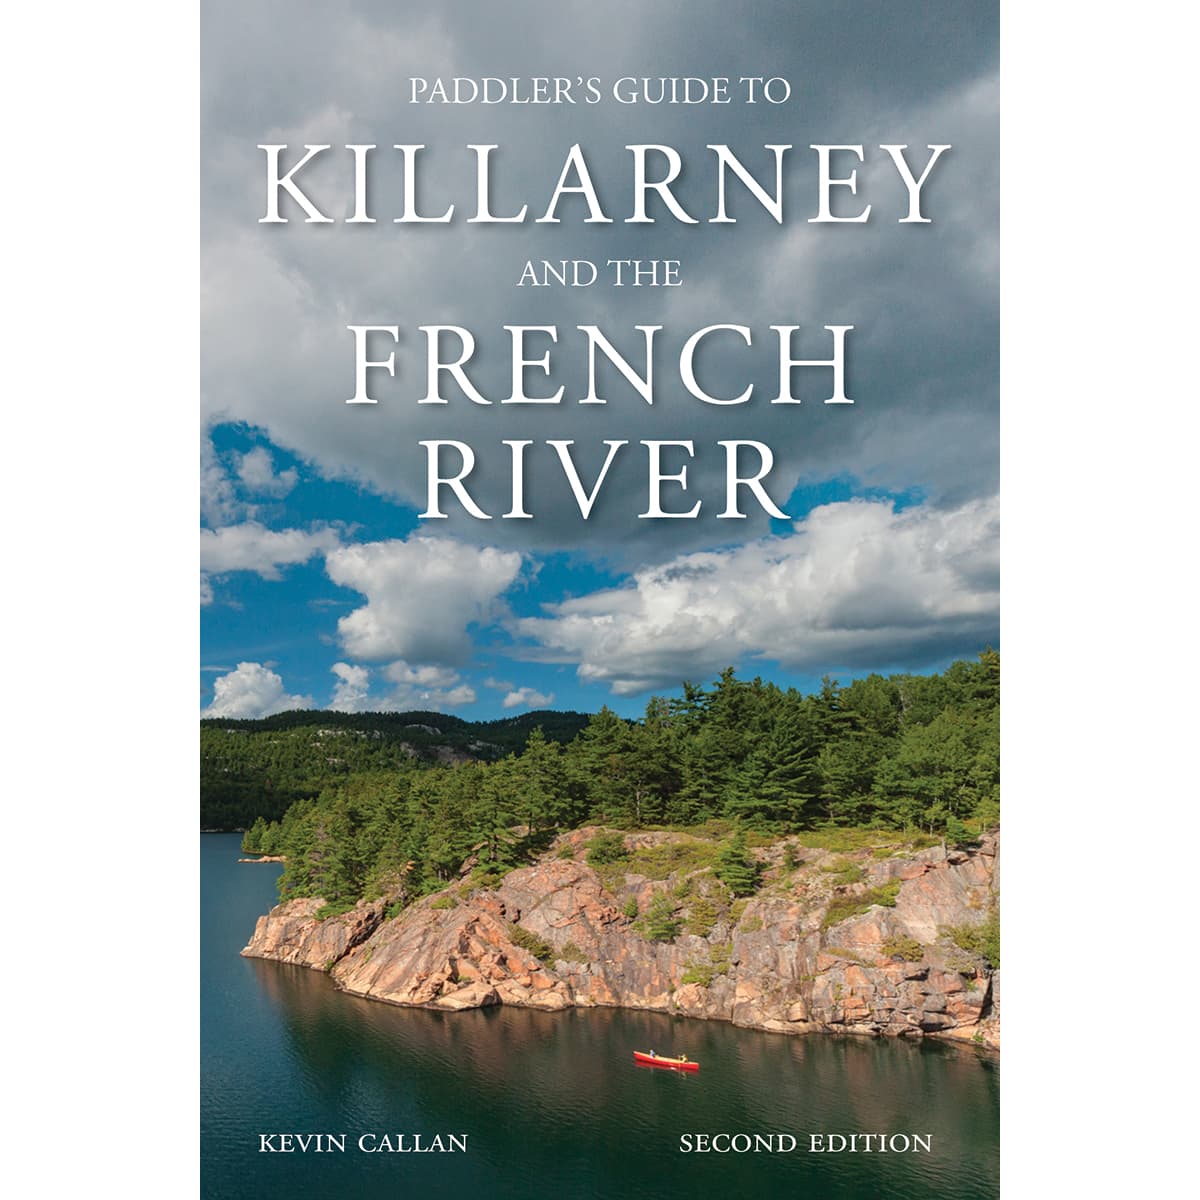 A Paddler's Guide to Killarney and the French River - Second Edition